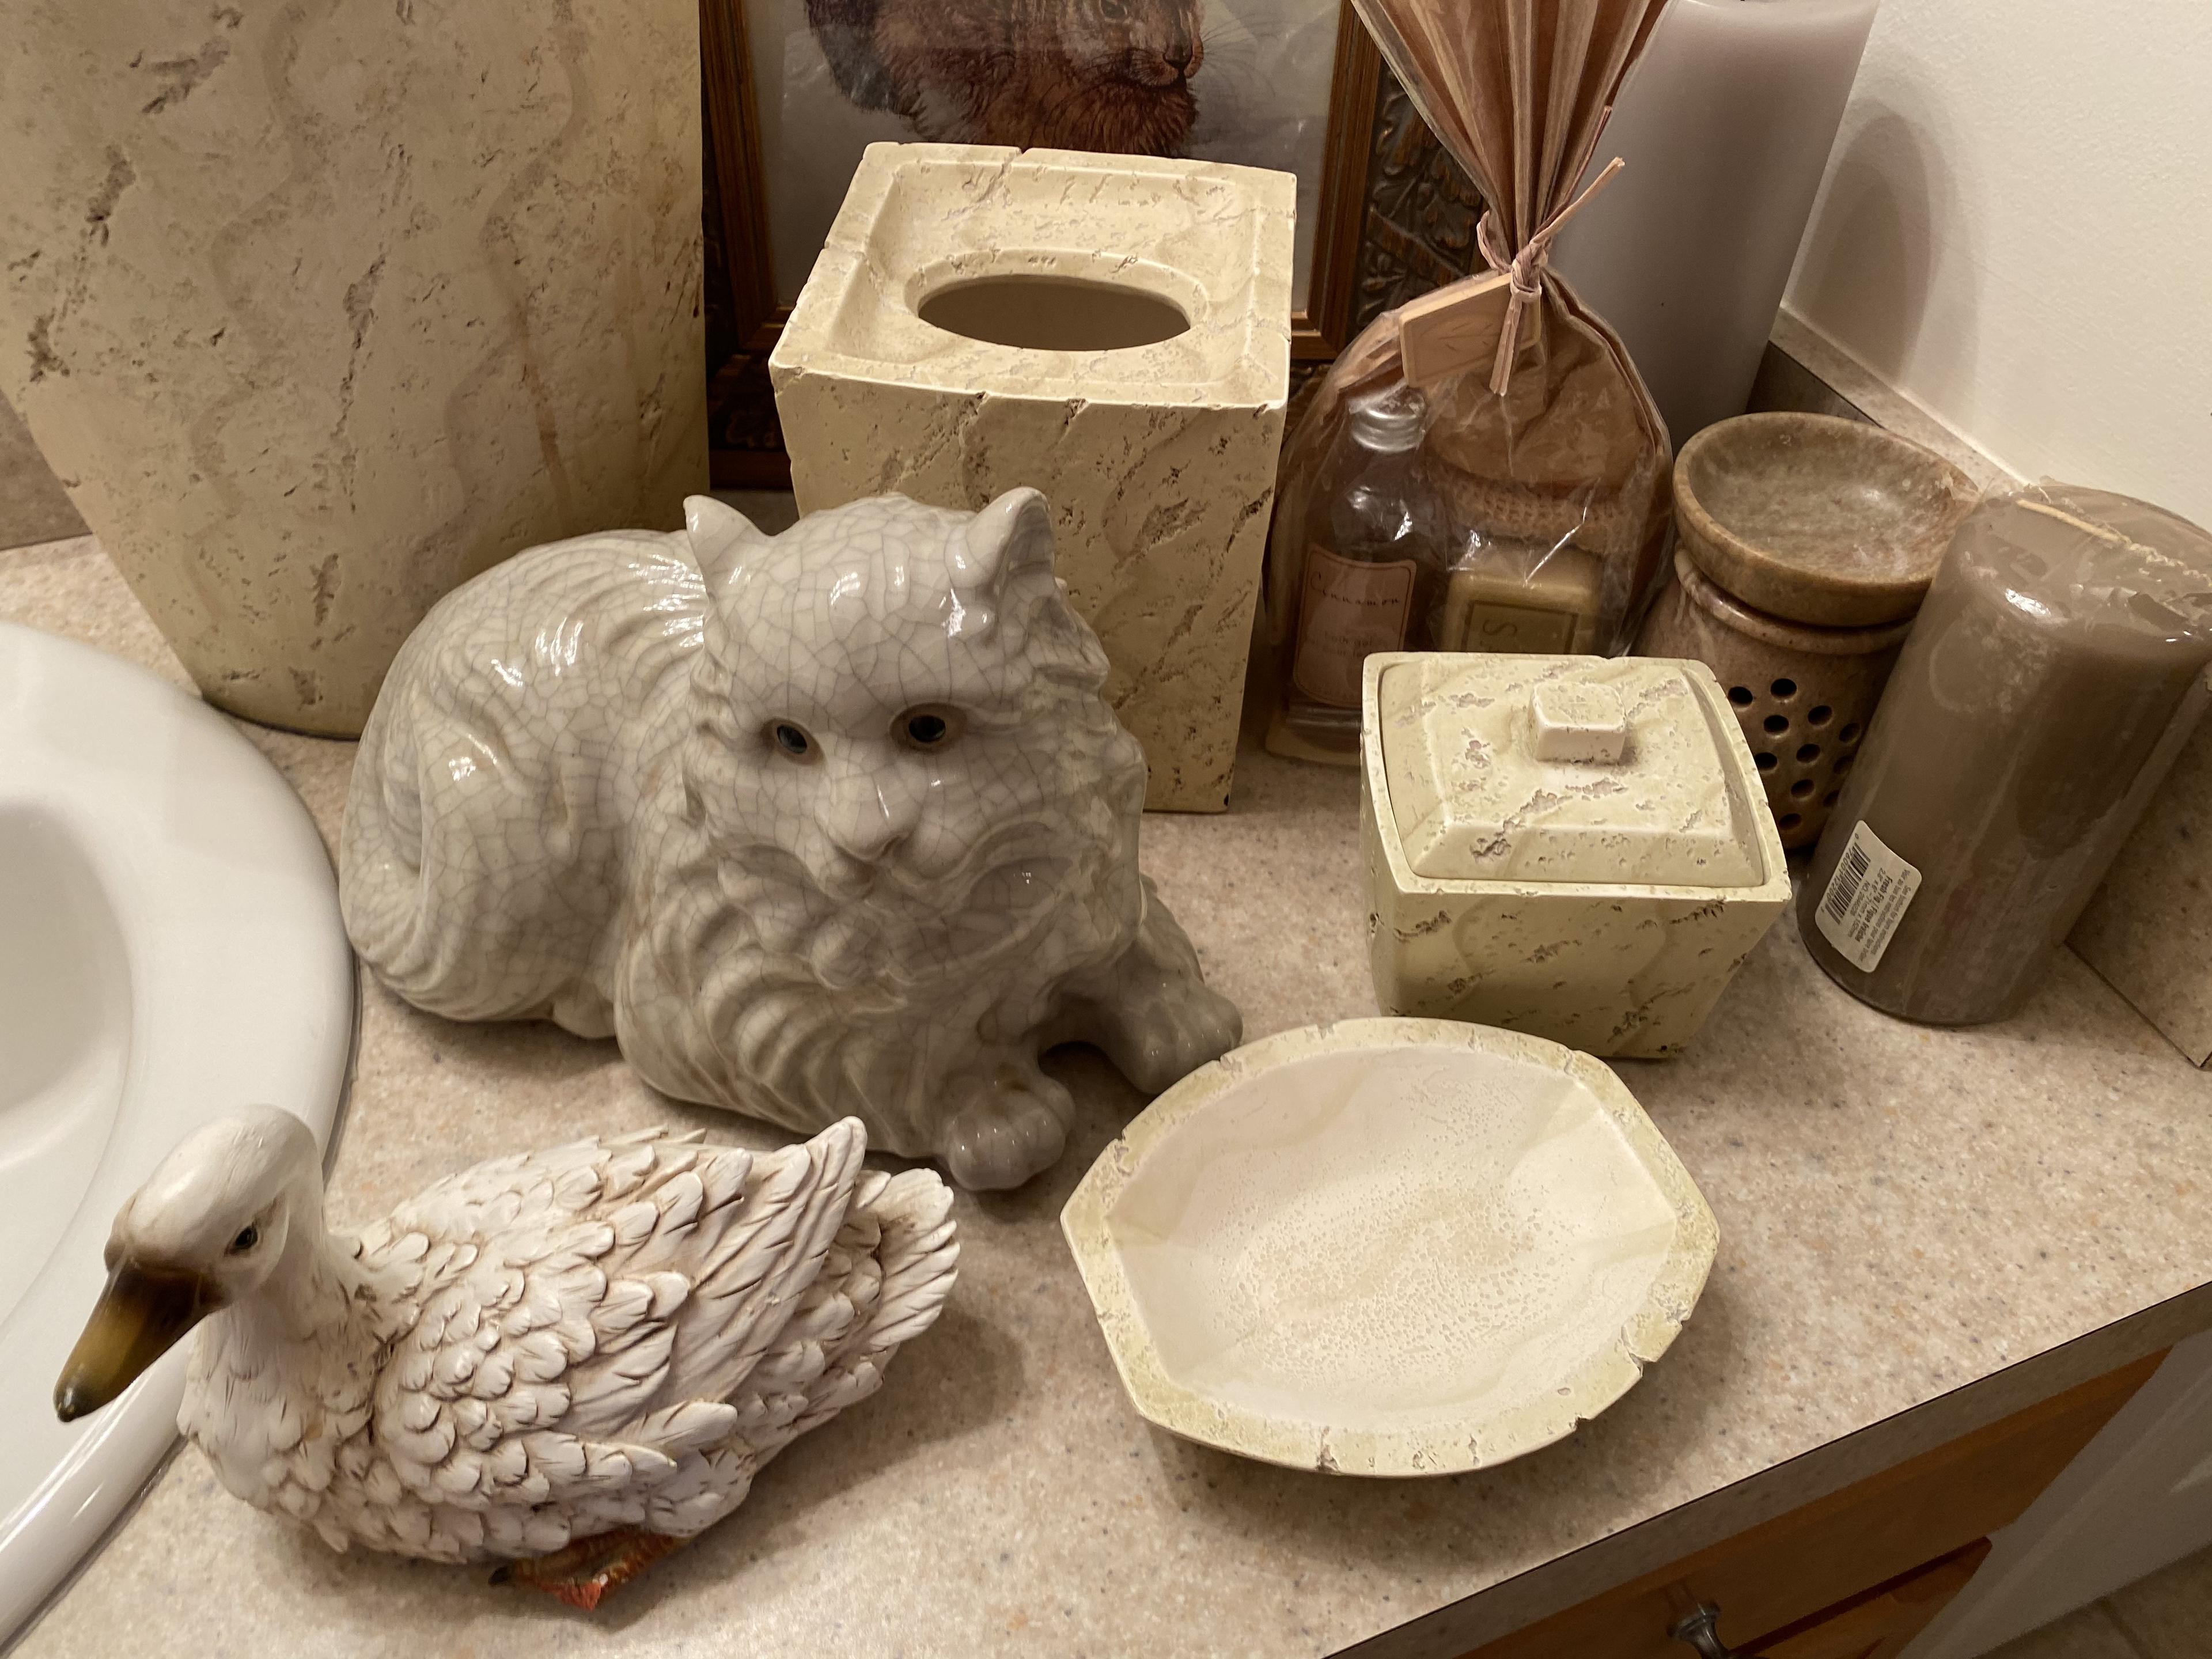 Large lot of decorative items in bathroom